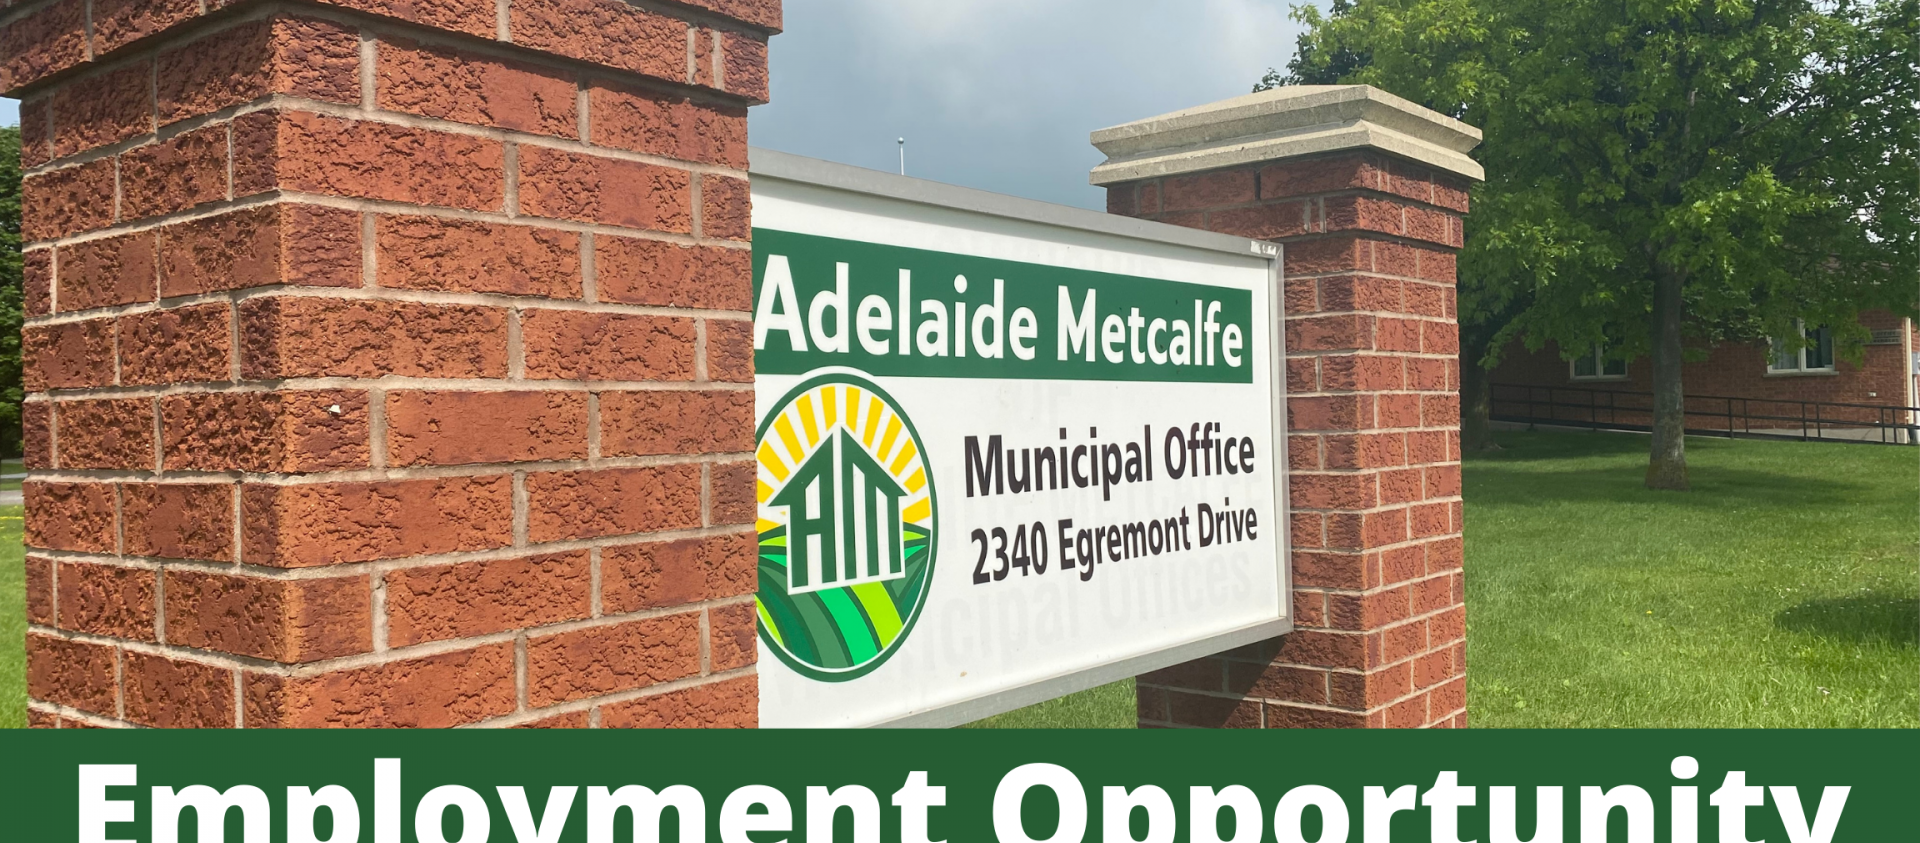 Picture of Adelaide Metcalfe municipal signage and job opportunity banner